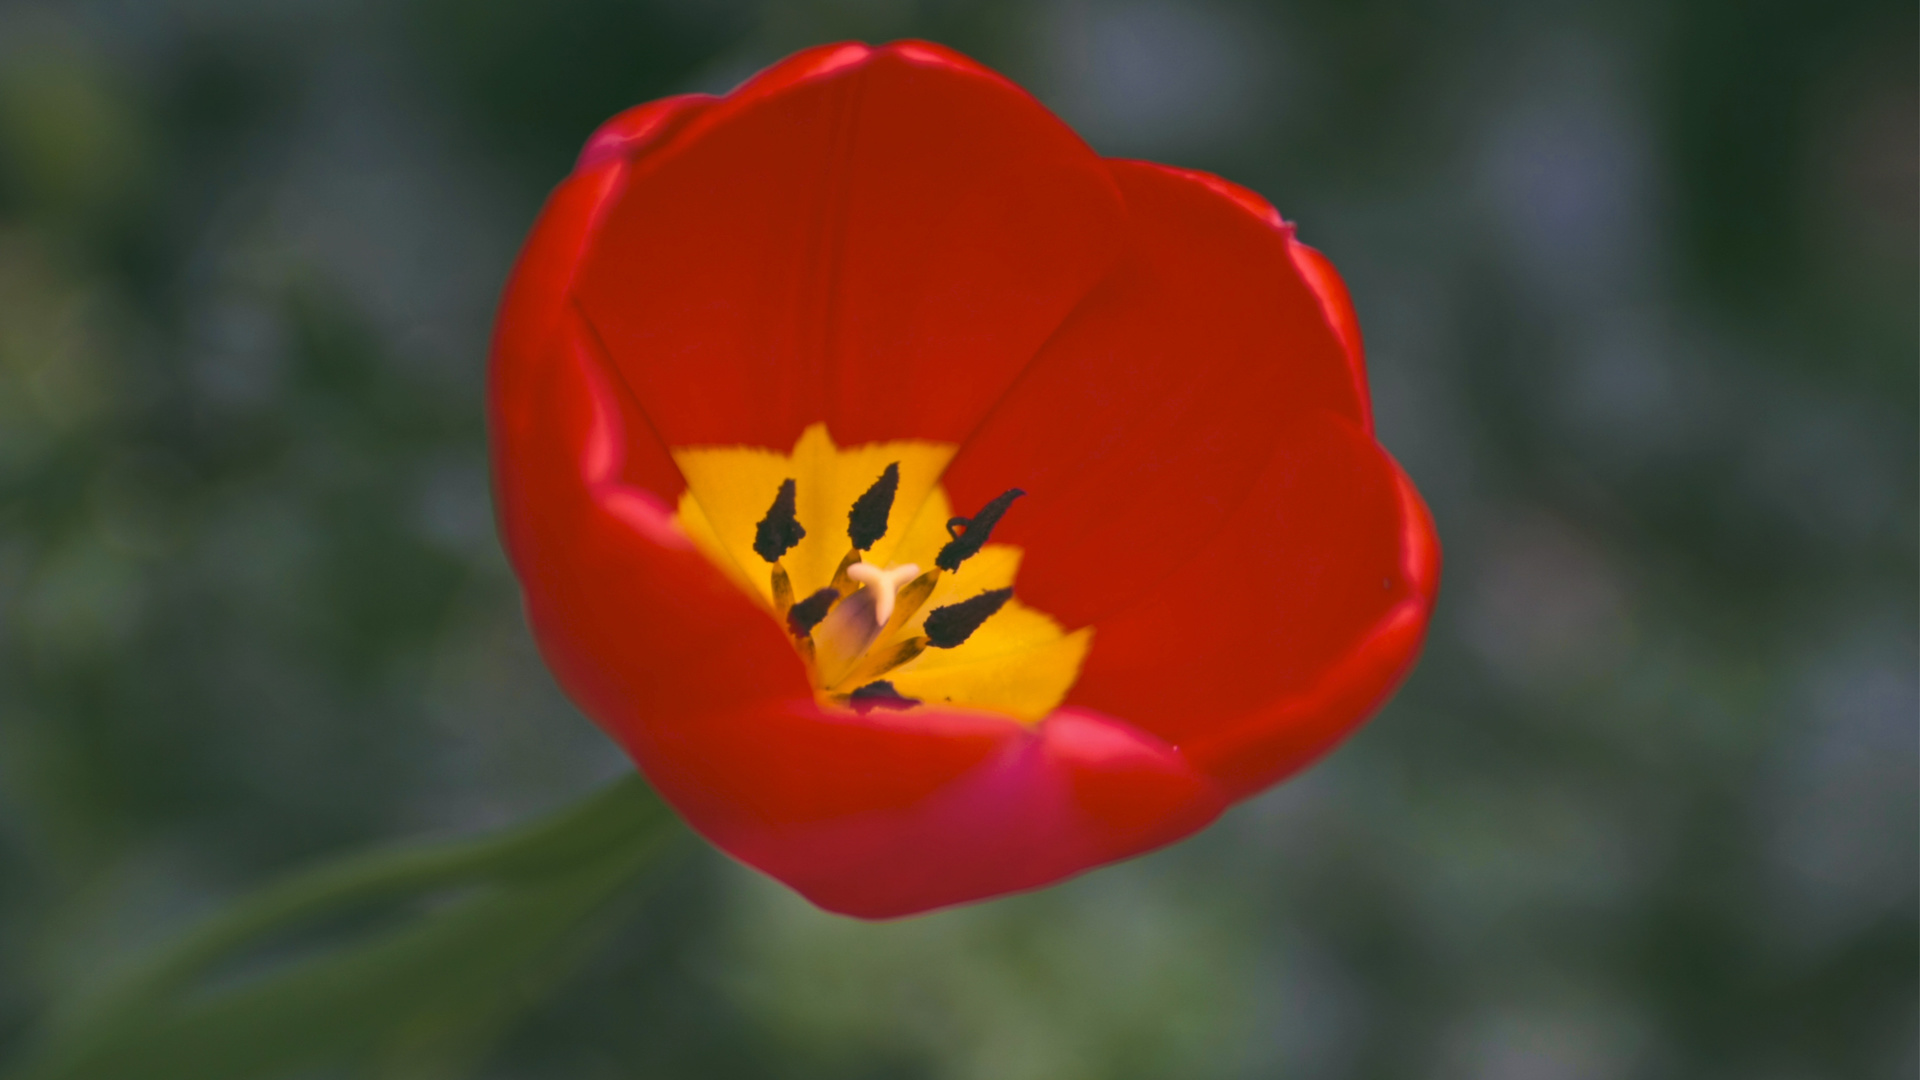 , one, , red, , , yellow, petals, Tulip